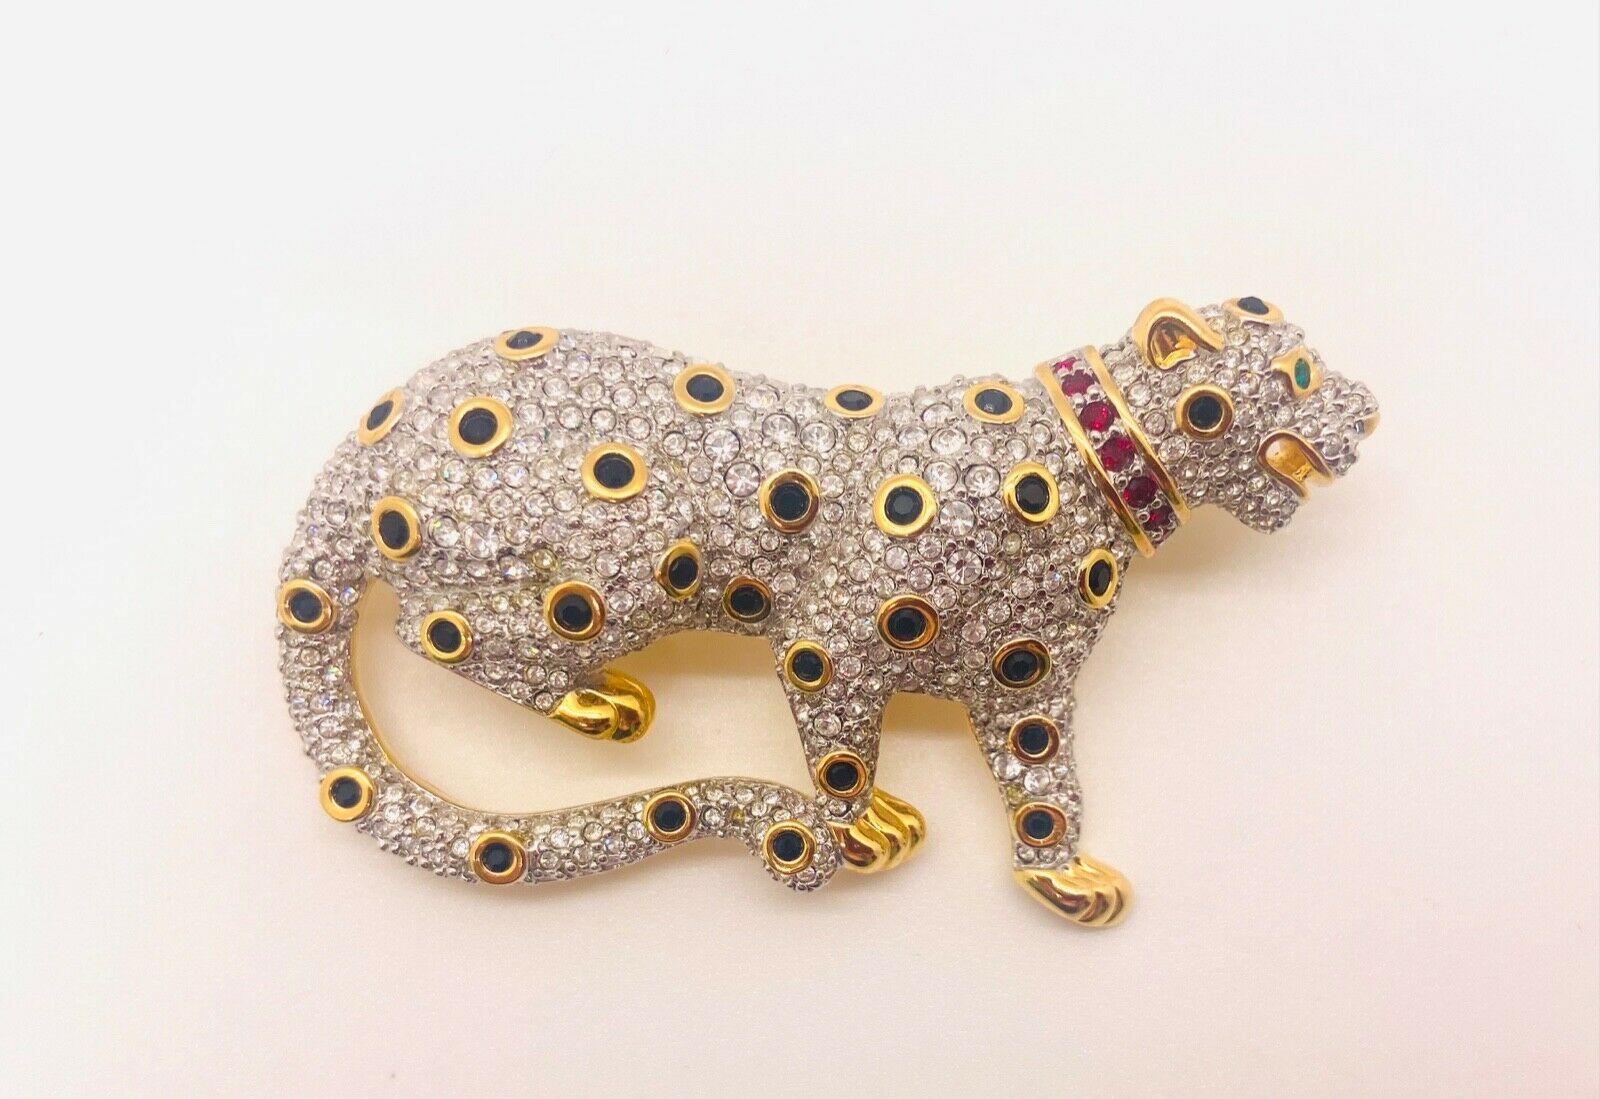 An authentic rare retired Swarovski pave' crystal leopard brooch or pin. The beautiful brooch is engraved with the Swarovski logo in the back and is gold plated featuring clear pave colored crystal accented with green and red crystals through out